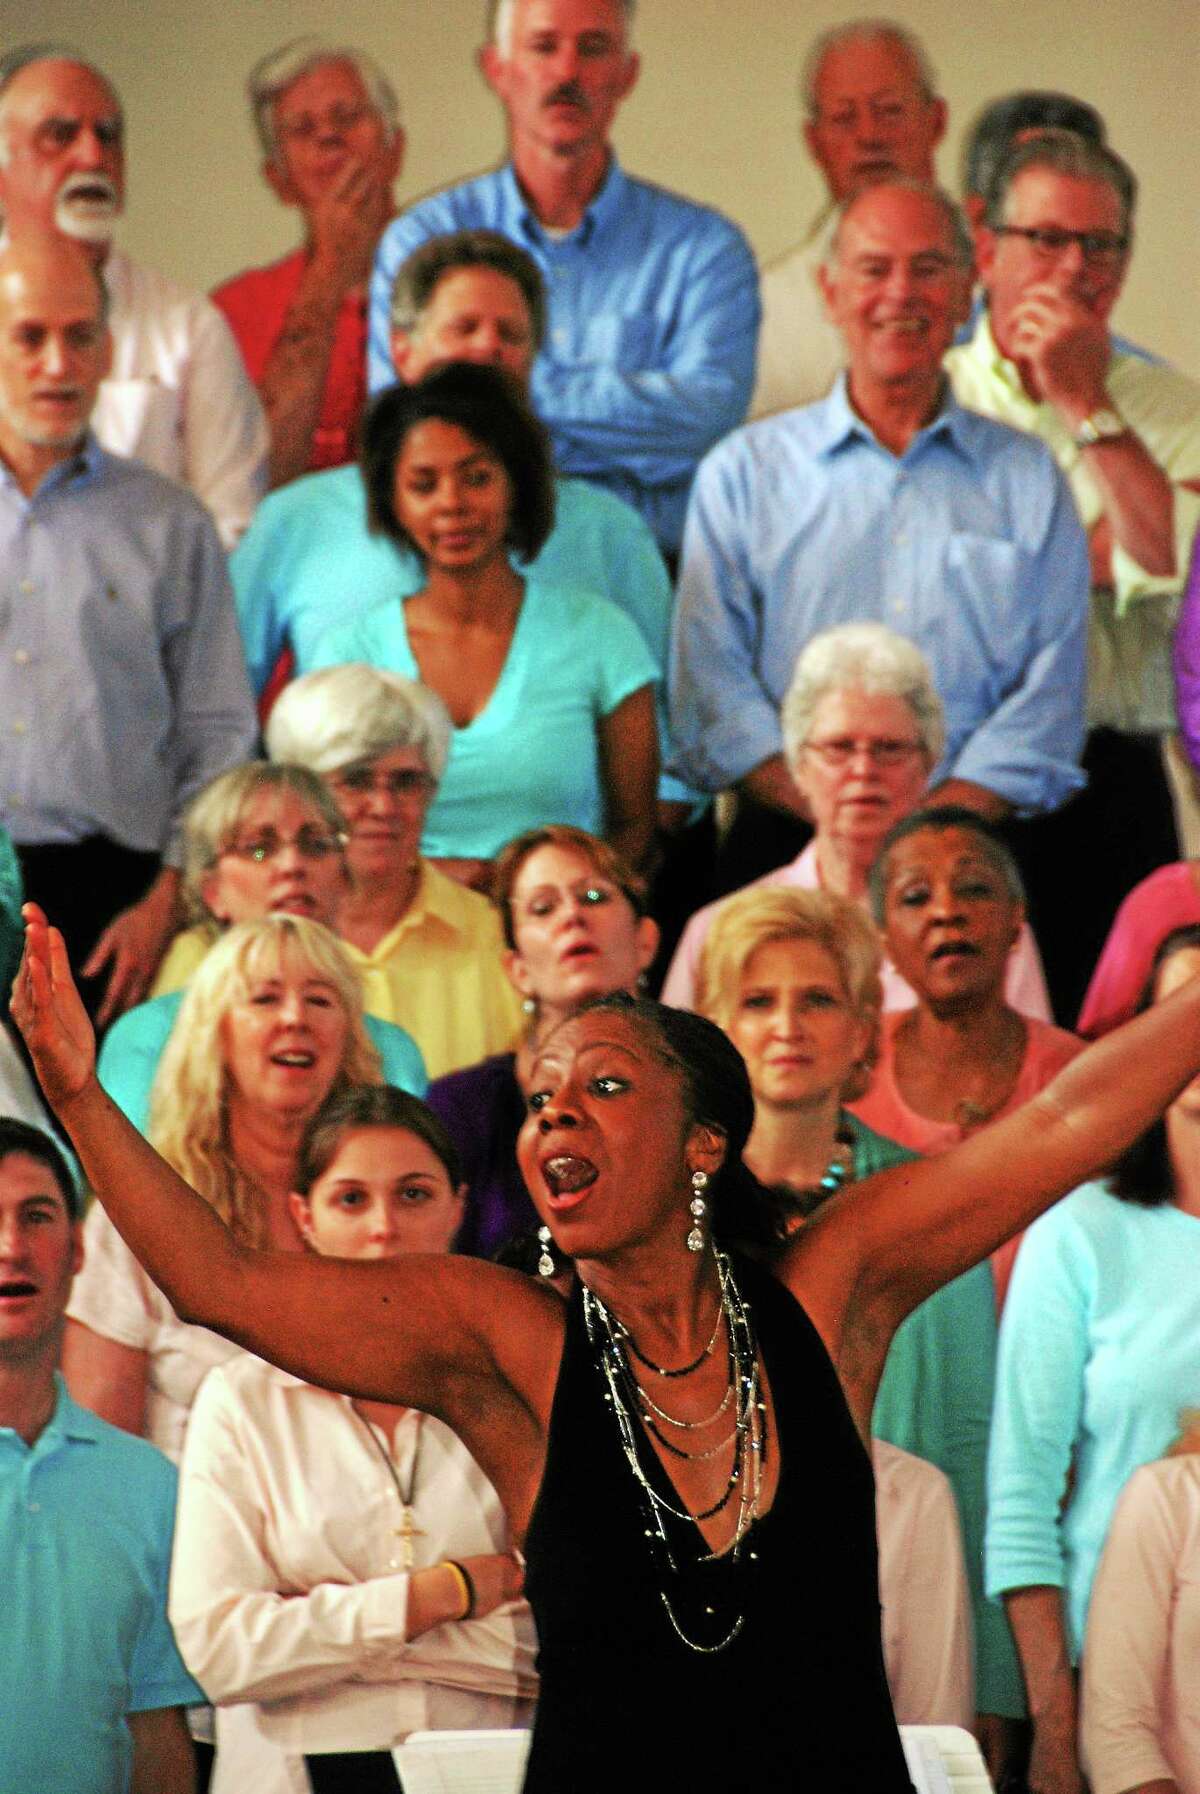 ìMusic at the Meetinghouseî is excited to announce the dates for another uplifting ìShoreline Soulî Community Choral Gospel Workshop at the First Congregational Church (on the town green) directed by the shorelineís own, Angela Clemmons. All levels are welcome to participate. The five 2-hour workshop sessions will culminate in a hand-clapping, foot-stomping, this-couldnít-possibly-be-Madison, CT concert, where the participants will perform the traditional and contemporary gospel songs theyíve learned. ìOur weekly sessions are upbeat, fun and very user-friendly,î Angela says. ìNo one needs to know how to read music. All songs are taught by ear and everyone is given a practice CD. Because itís all about the music and not a church service, we get singers from all faiths and even the faith-less. It works well. Itís amazing how much the choir learns and how confident they become in five short weeks, particularly when many have never sung gospel before.î There will be five Monday sessions, April 27, May 4, 11, 18, (skip Memorial Day), resume June 1, from 6:45-8:45 PM, at the First Congregational Church (on the town green), 26 Meetinghouse Lane, Madison, CT. The concert, which is free and open to the public will be Sunday, June 7 at 3:00 PM, with a pre-concert rehearsal at 1:30 PM. The workshop registration fee is $90.00. If PAID by April 13, the early registration fee is $80.00. You may begin your registration by phone: 203-619-1415 or e-mail: shorelinesoul@comcast.net. Registration is only complete after payment has been received. Some scholarships are available. Although the workshop is primarily for adults, youth who are able to follow a lyric sheet are welcome to participate.